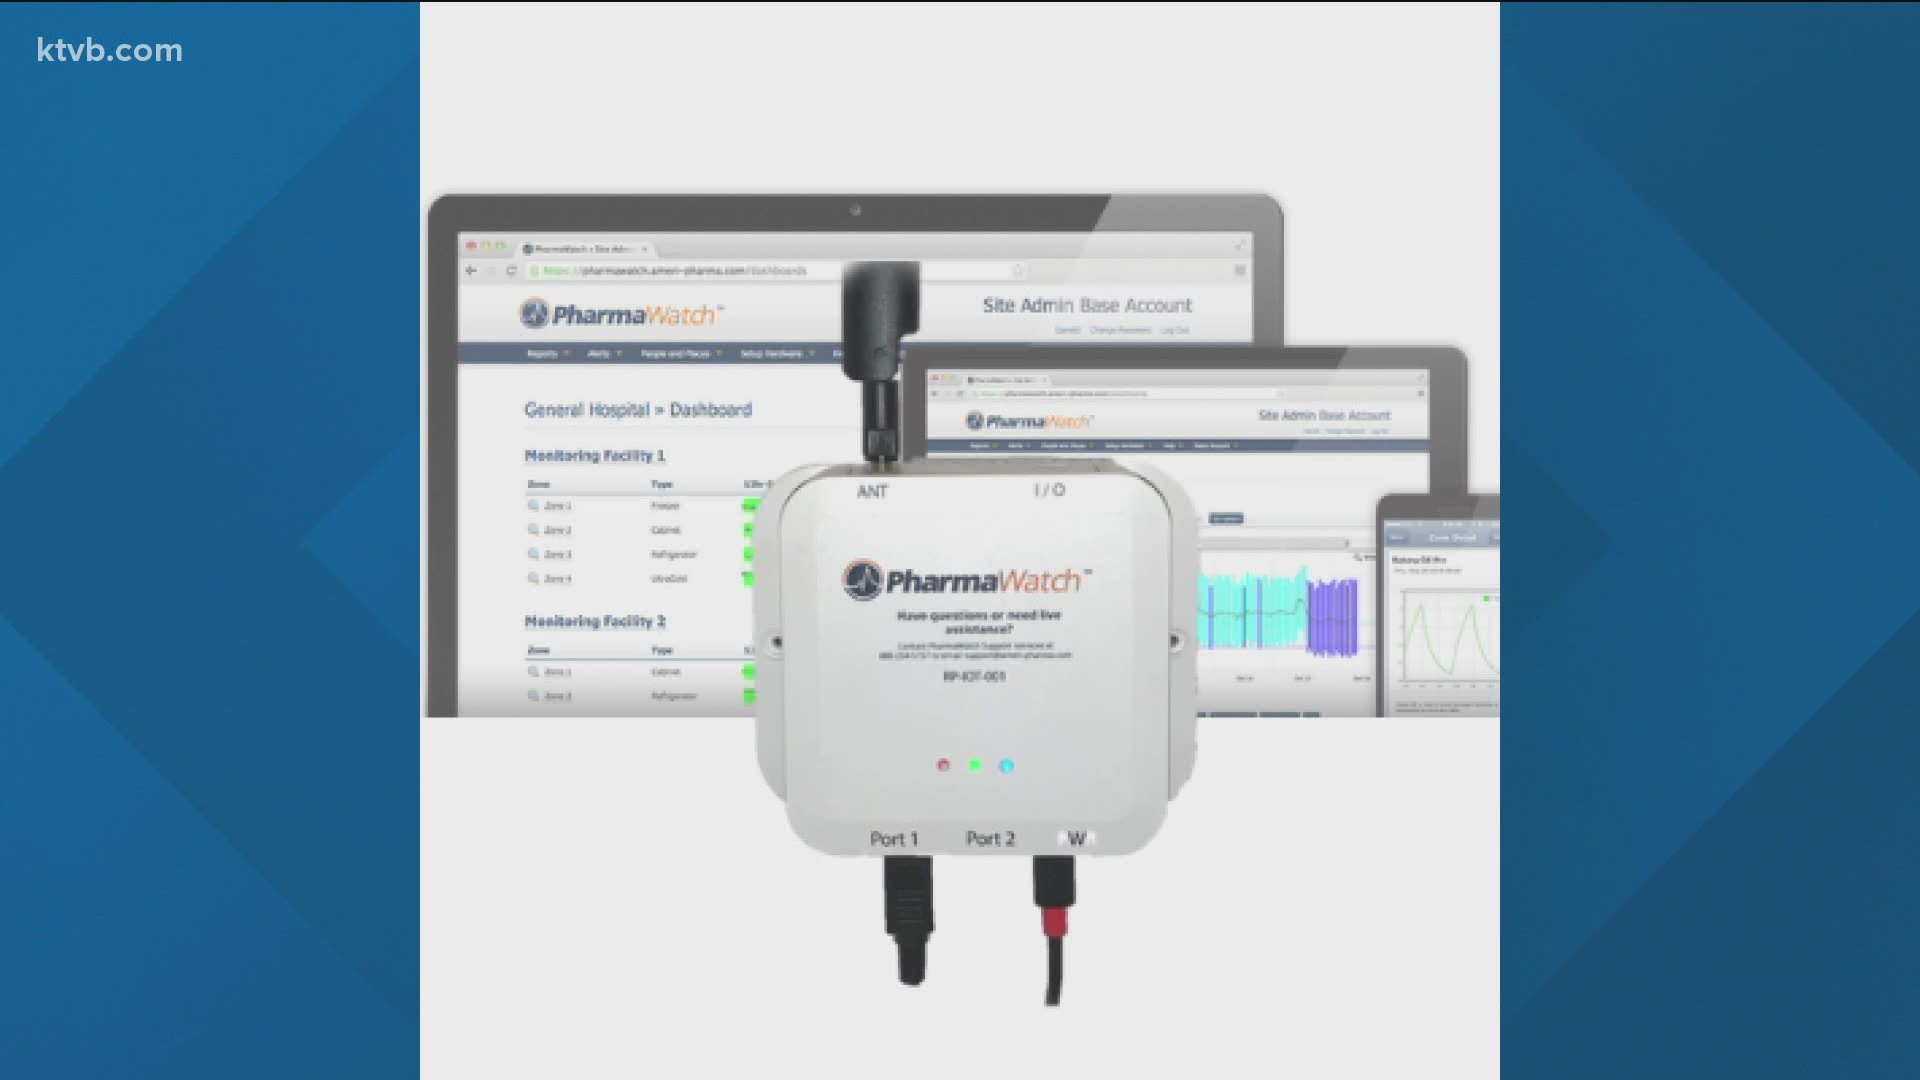 American Pharma Technologies created PharmaWatch in 2013 to monitor vaccine temperatures. Now they plan to use it on the COVID-19 vaccine.